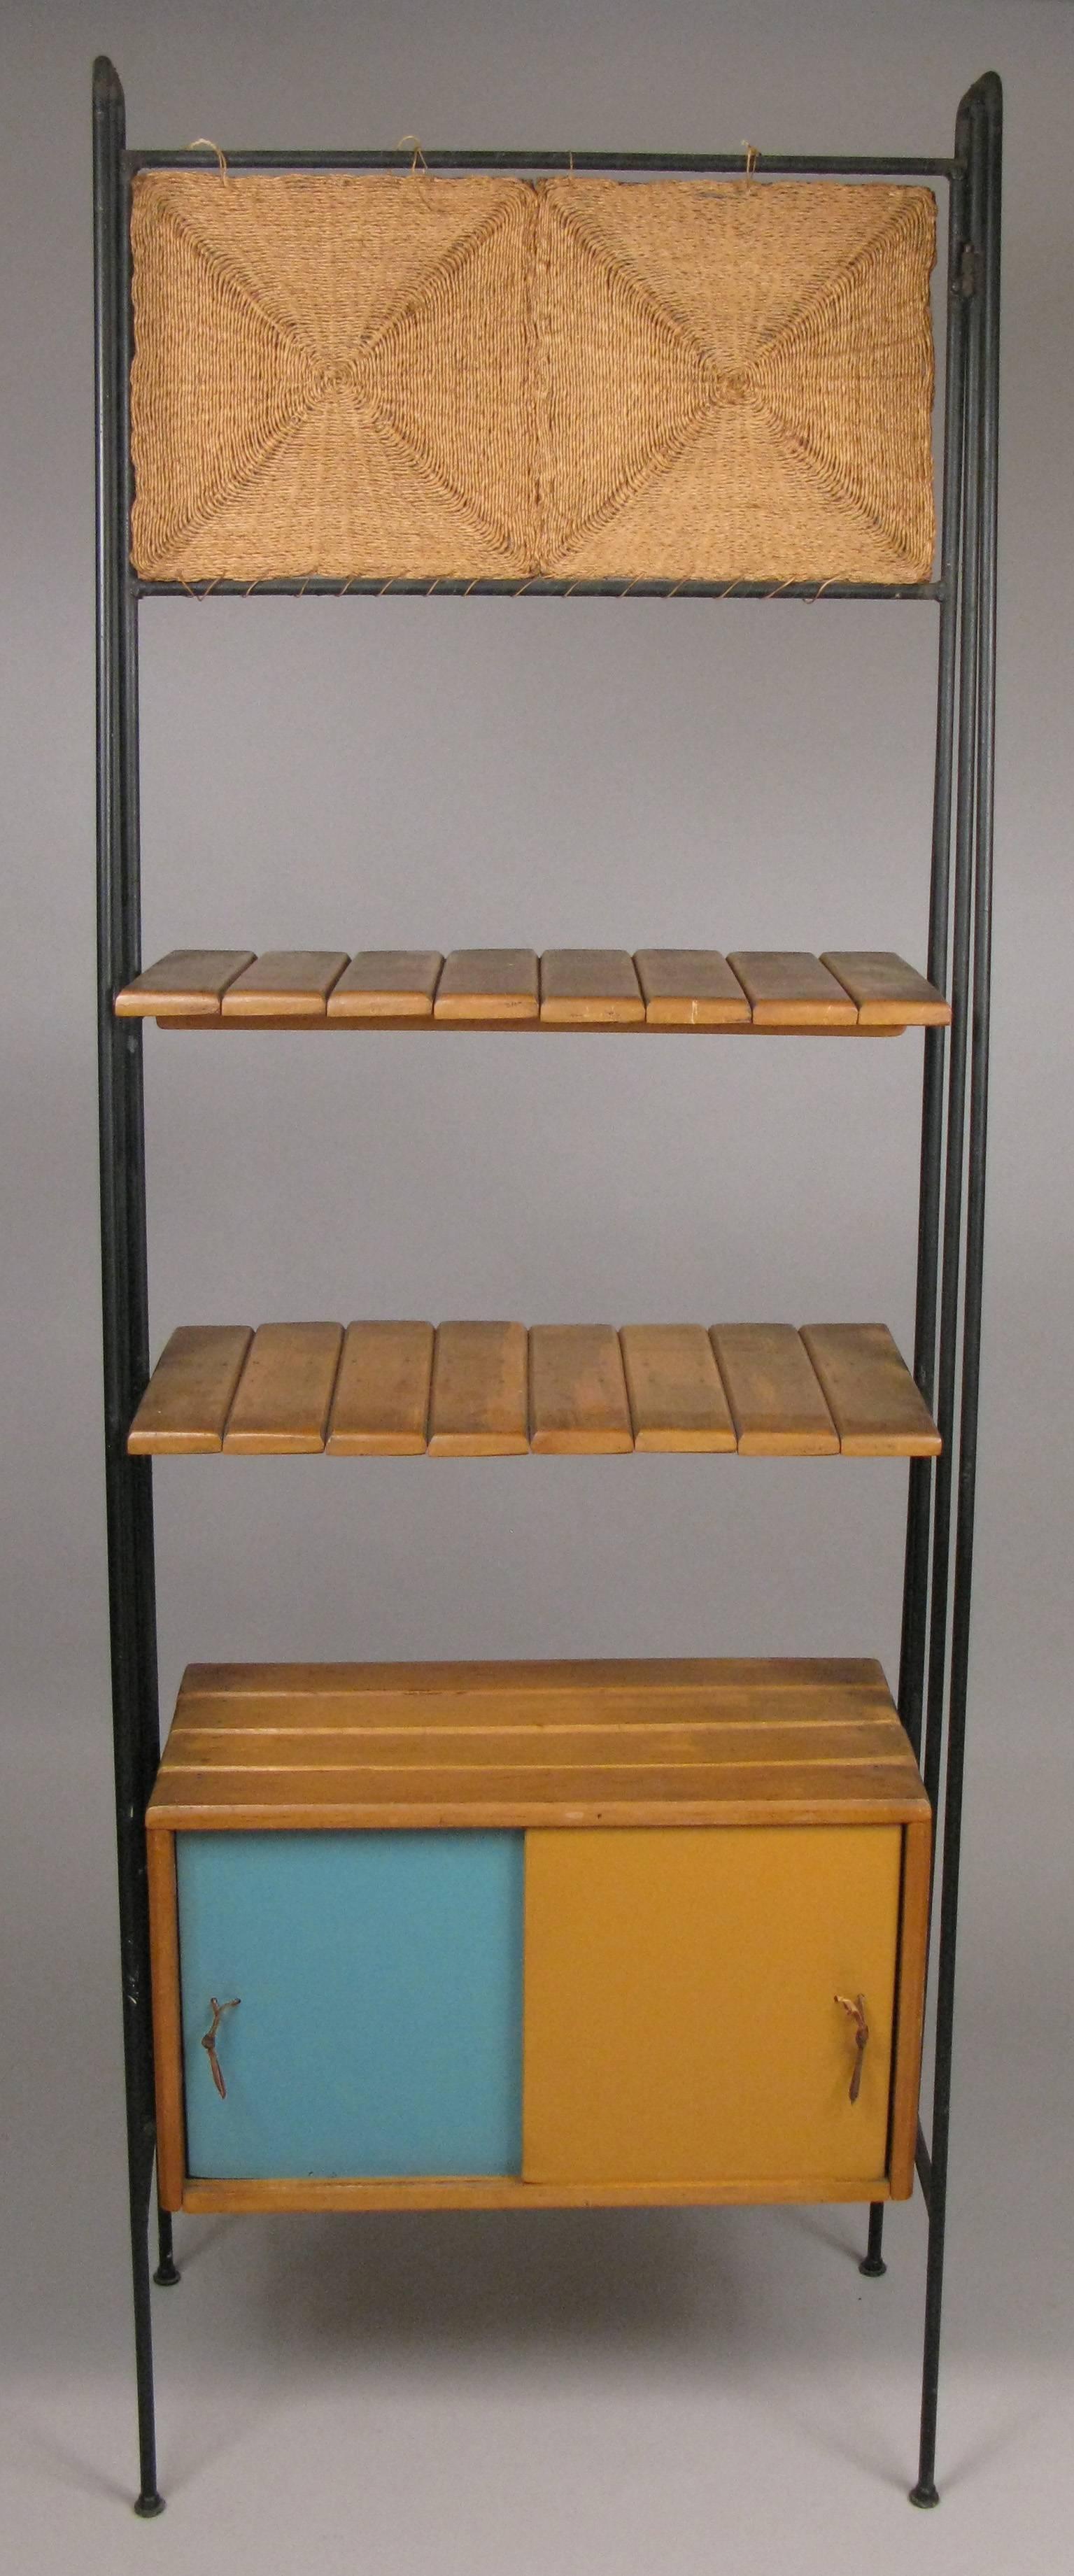 A rare vintage 1950s freestanding etagere or bar cabinet designed by Arthur Umanoff. having a wrought iron frame, and lower storage cabinet with color block sliding panel doors on both front and back, and two birch shelves, along with a decorative